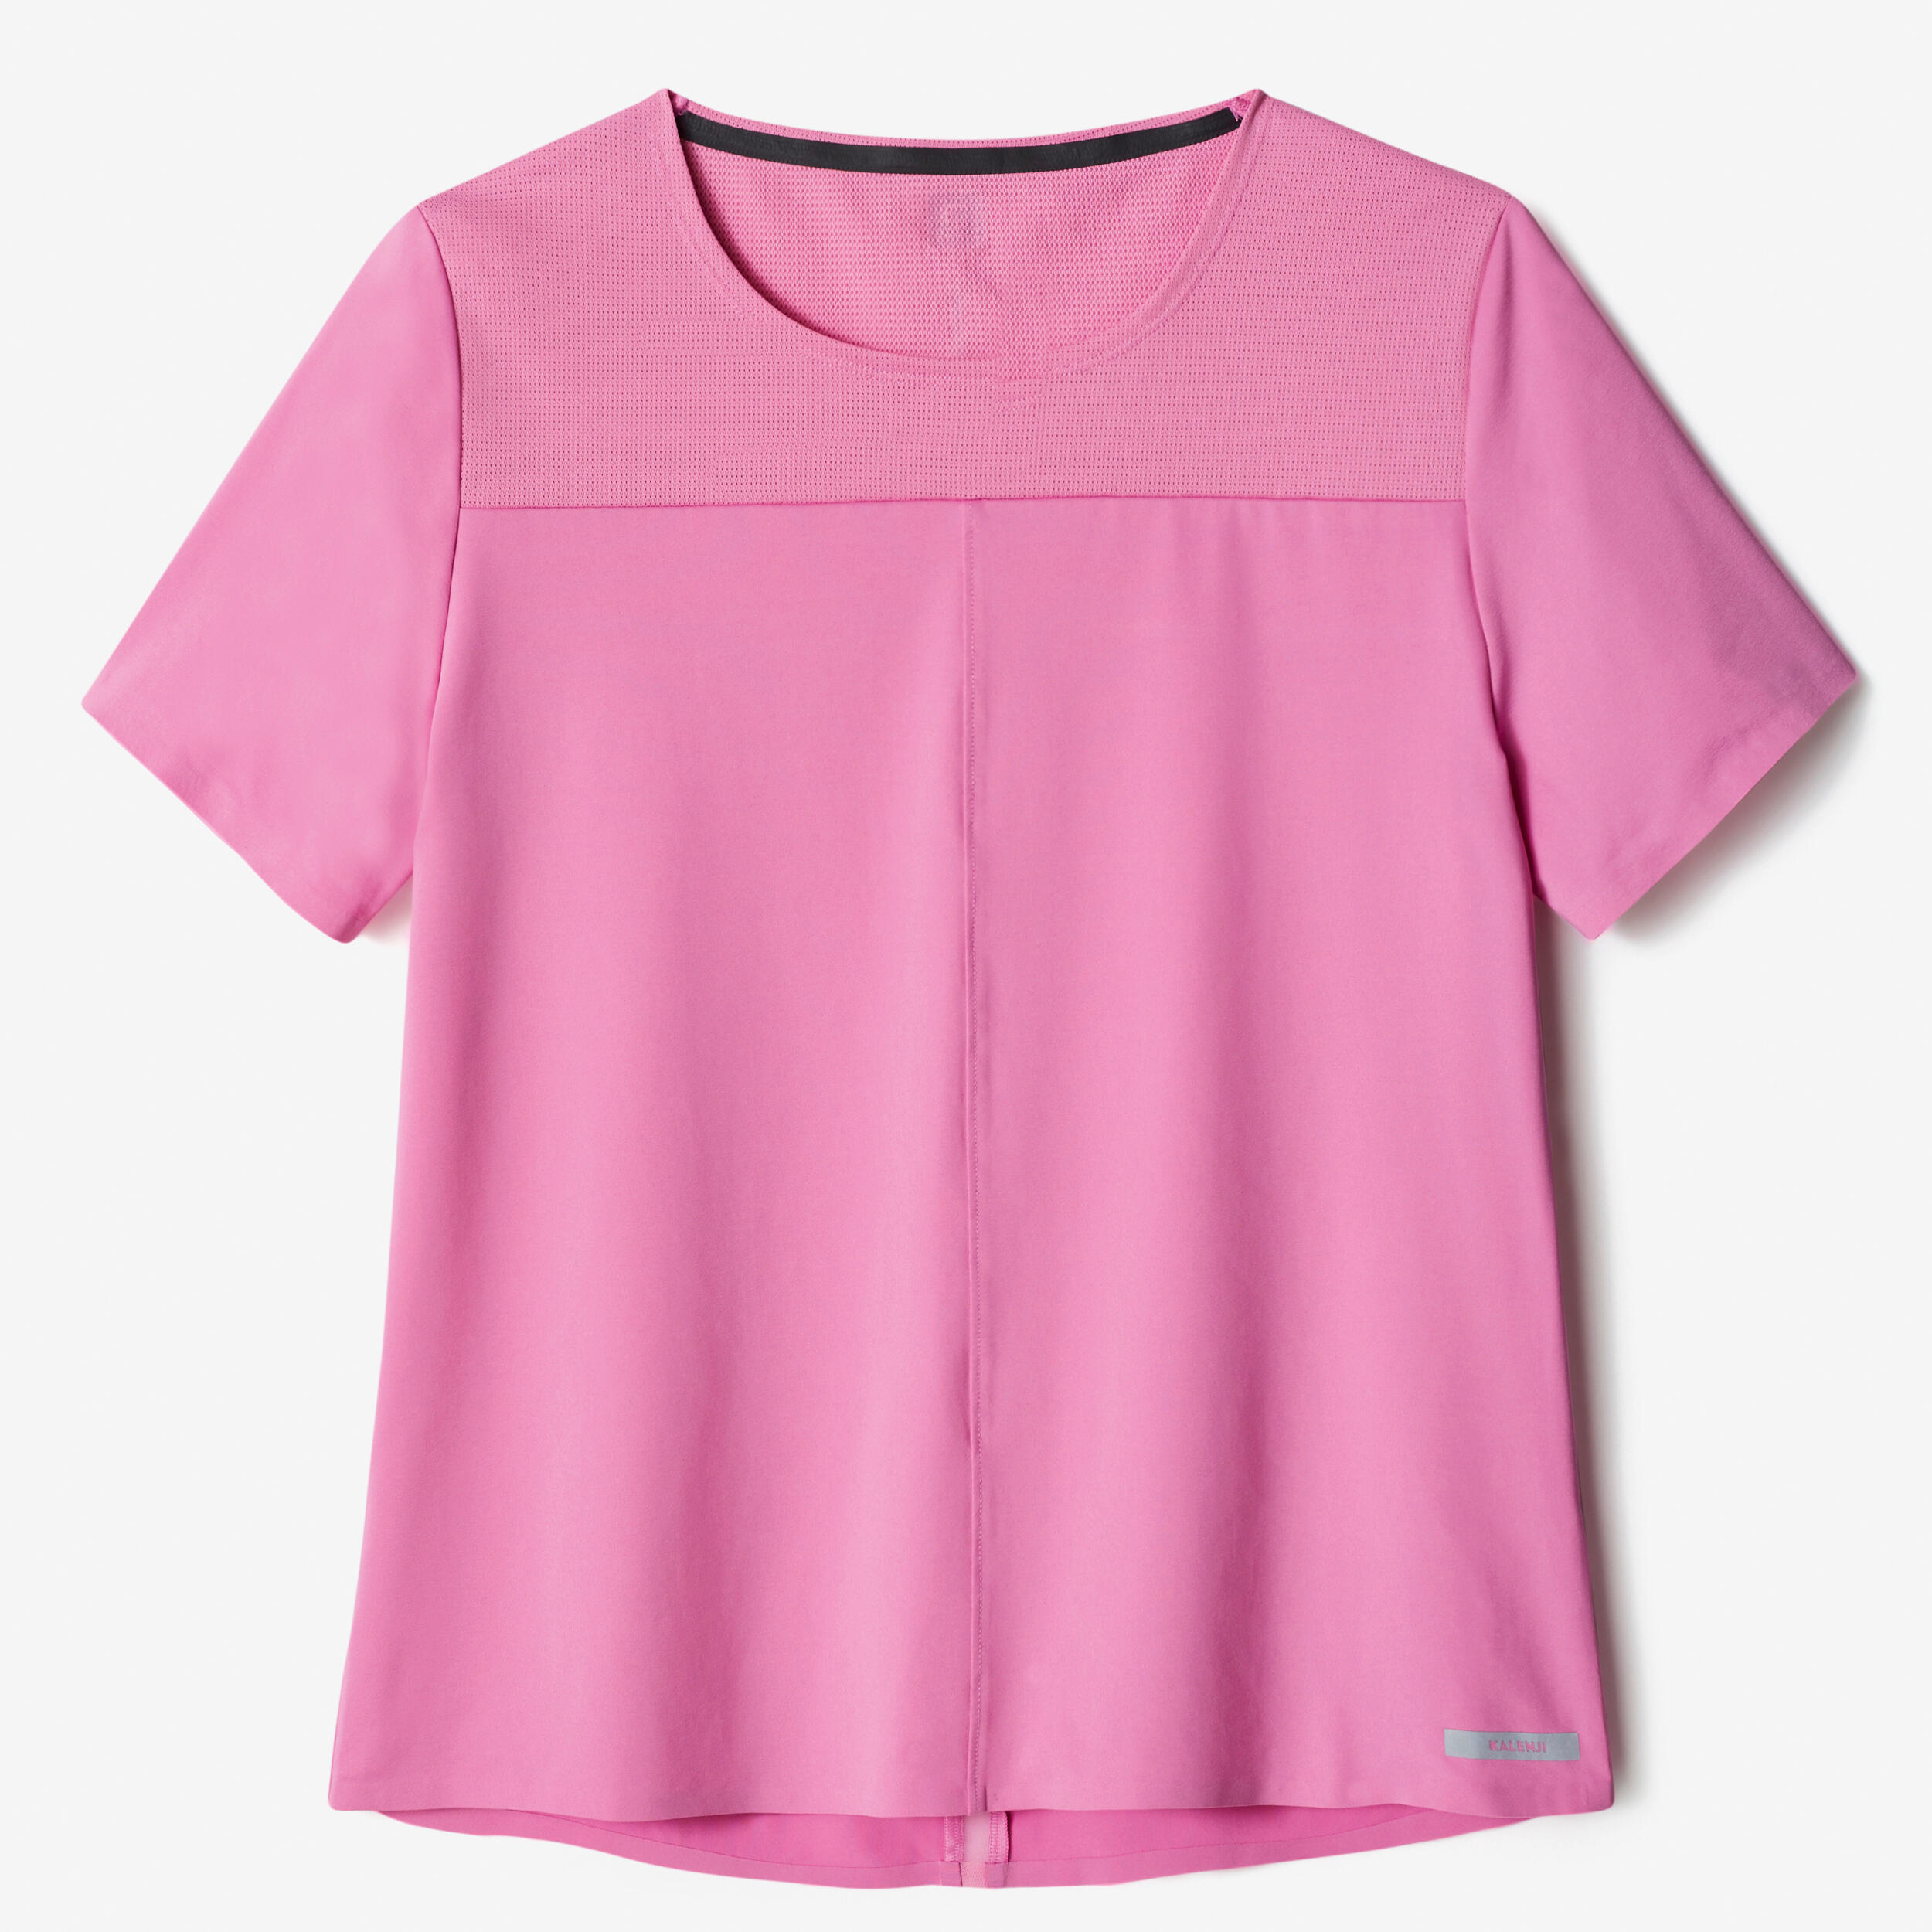 Women's breathable running T-shirt Dry+ Breath - pink 6/6